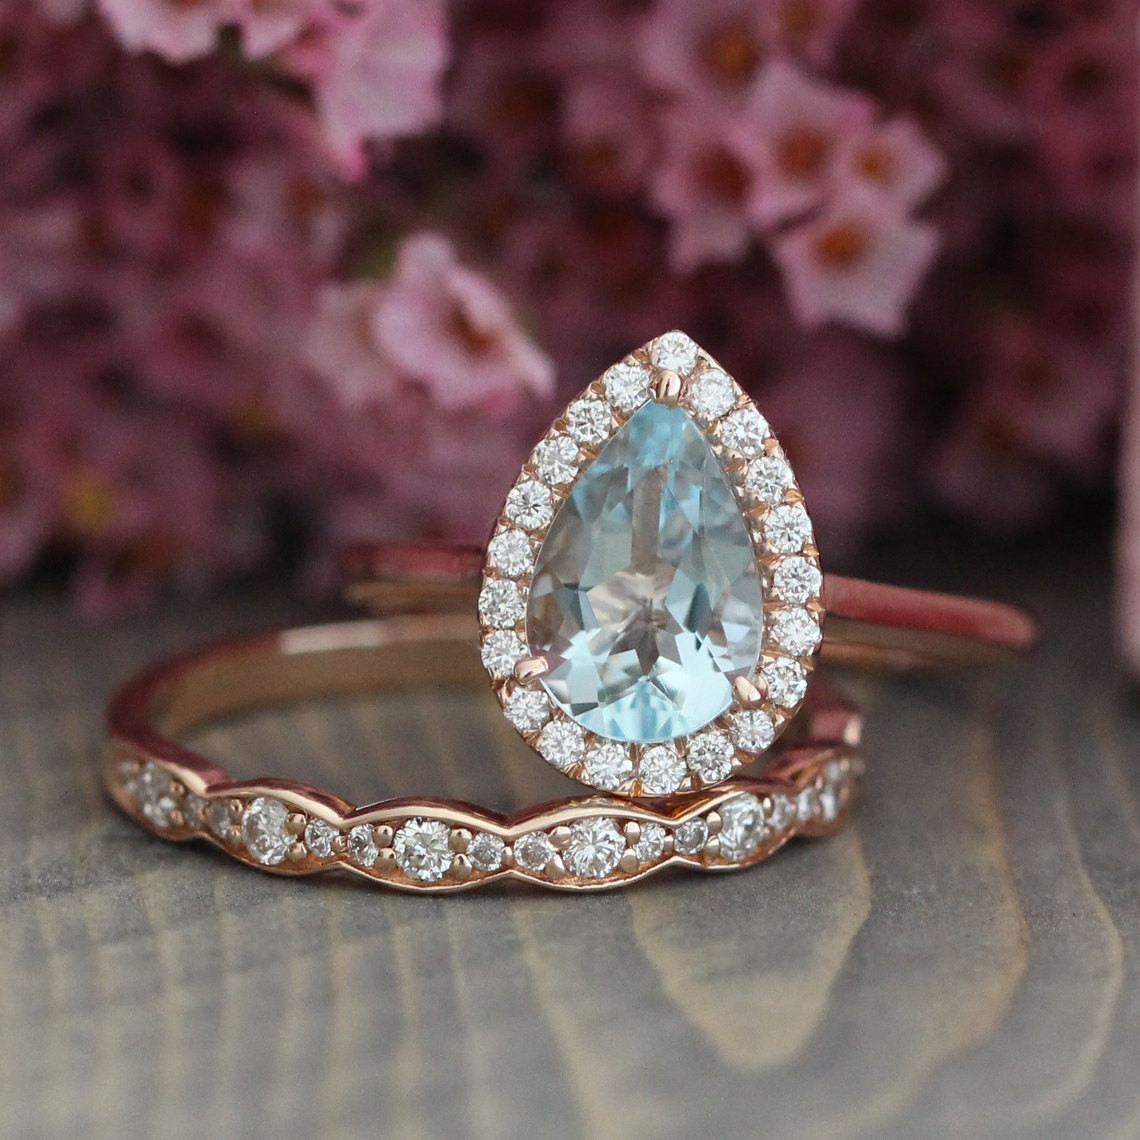 Wedding Bands And Engagement Rings
 Pear Aquamarine Engagement Ring and Scalloped by LaMoreDesign